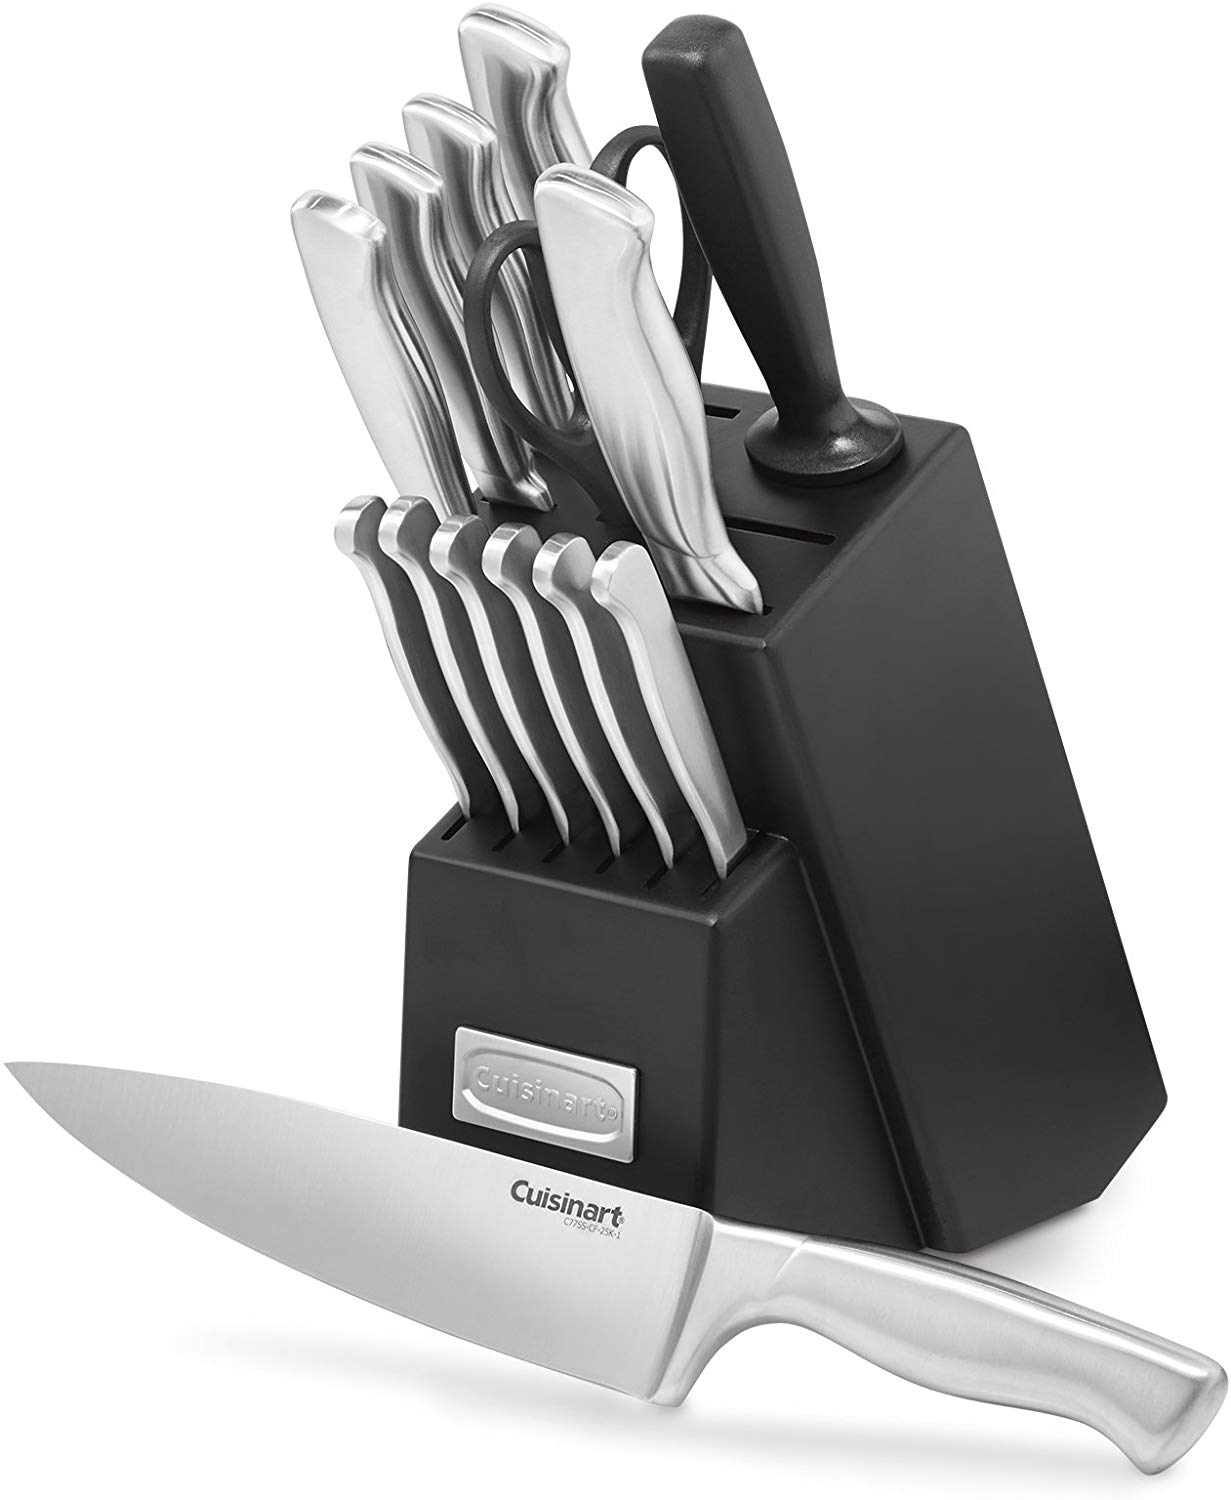 A Buying Guide to Kitchen Knife Sets